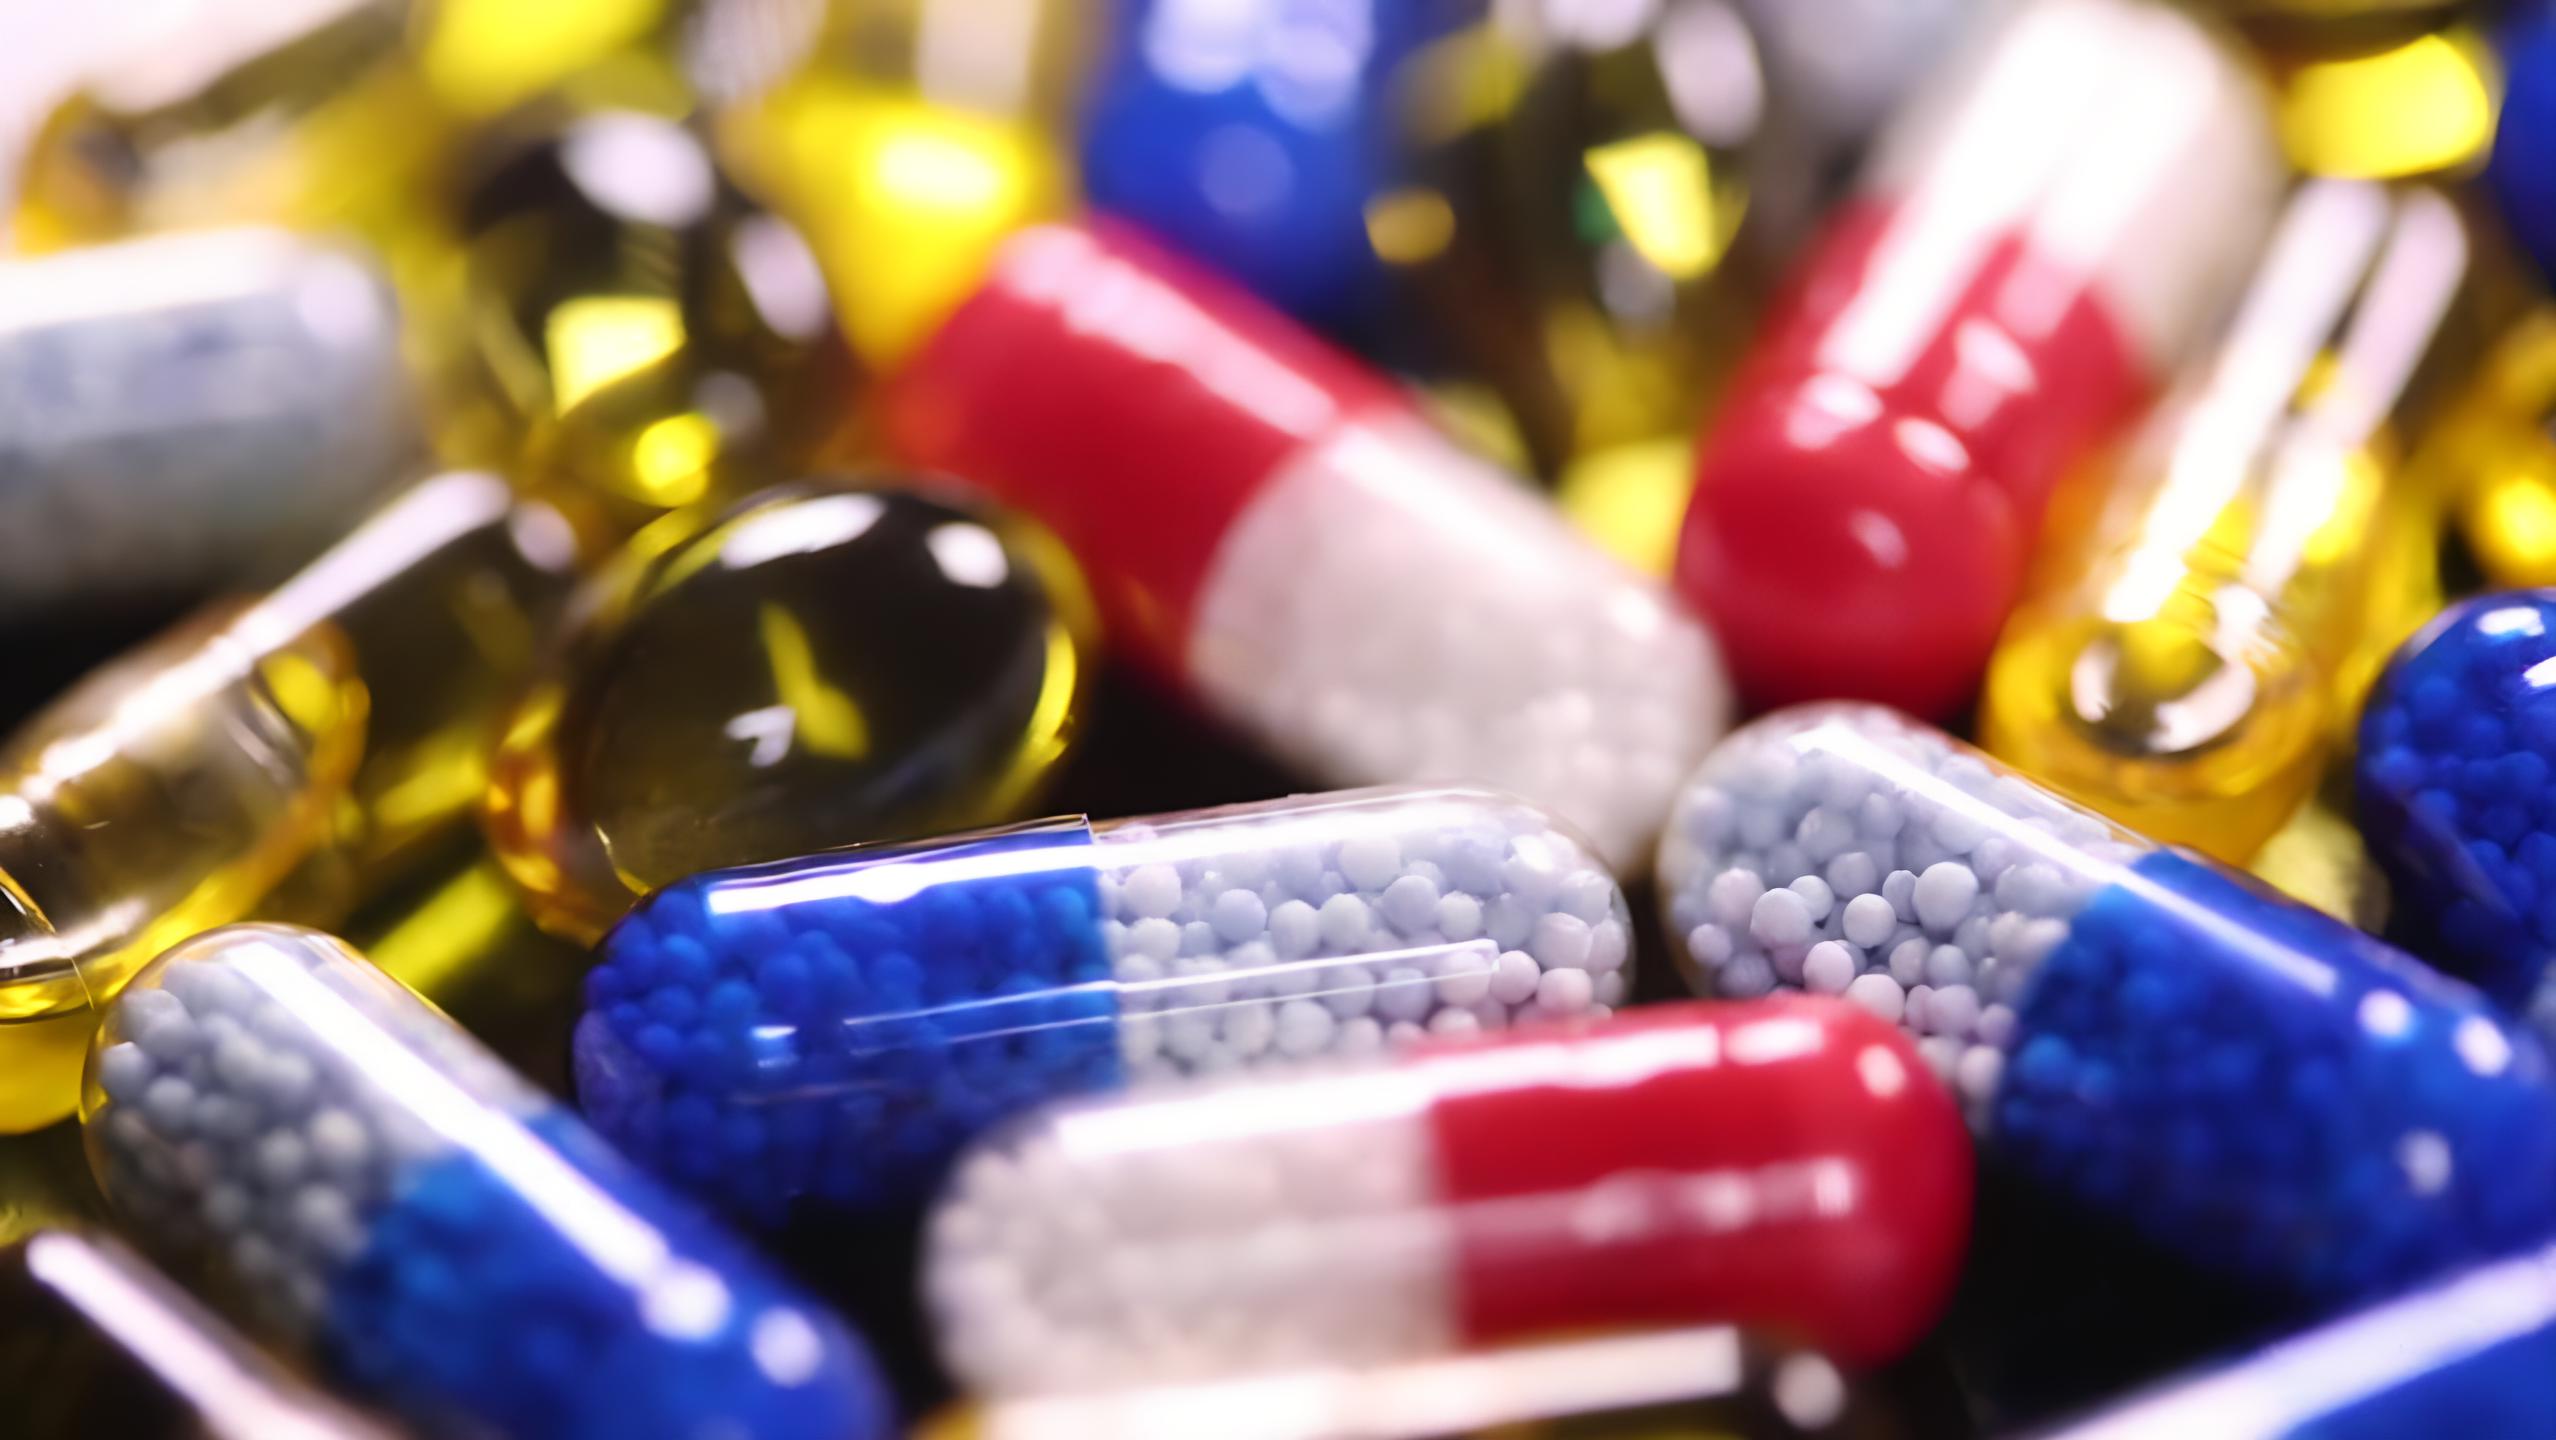 Capsules: A Comprehensive Study About Enclosed Drugs